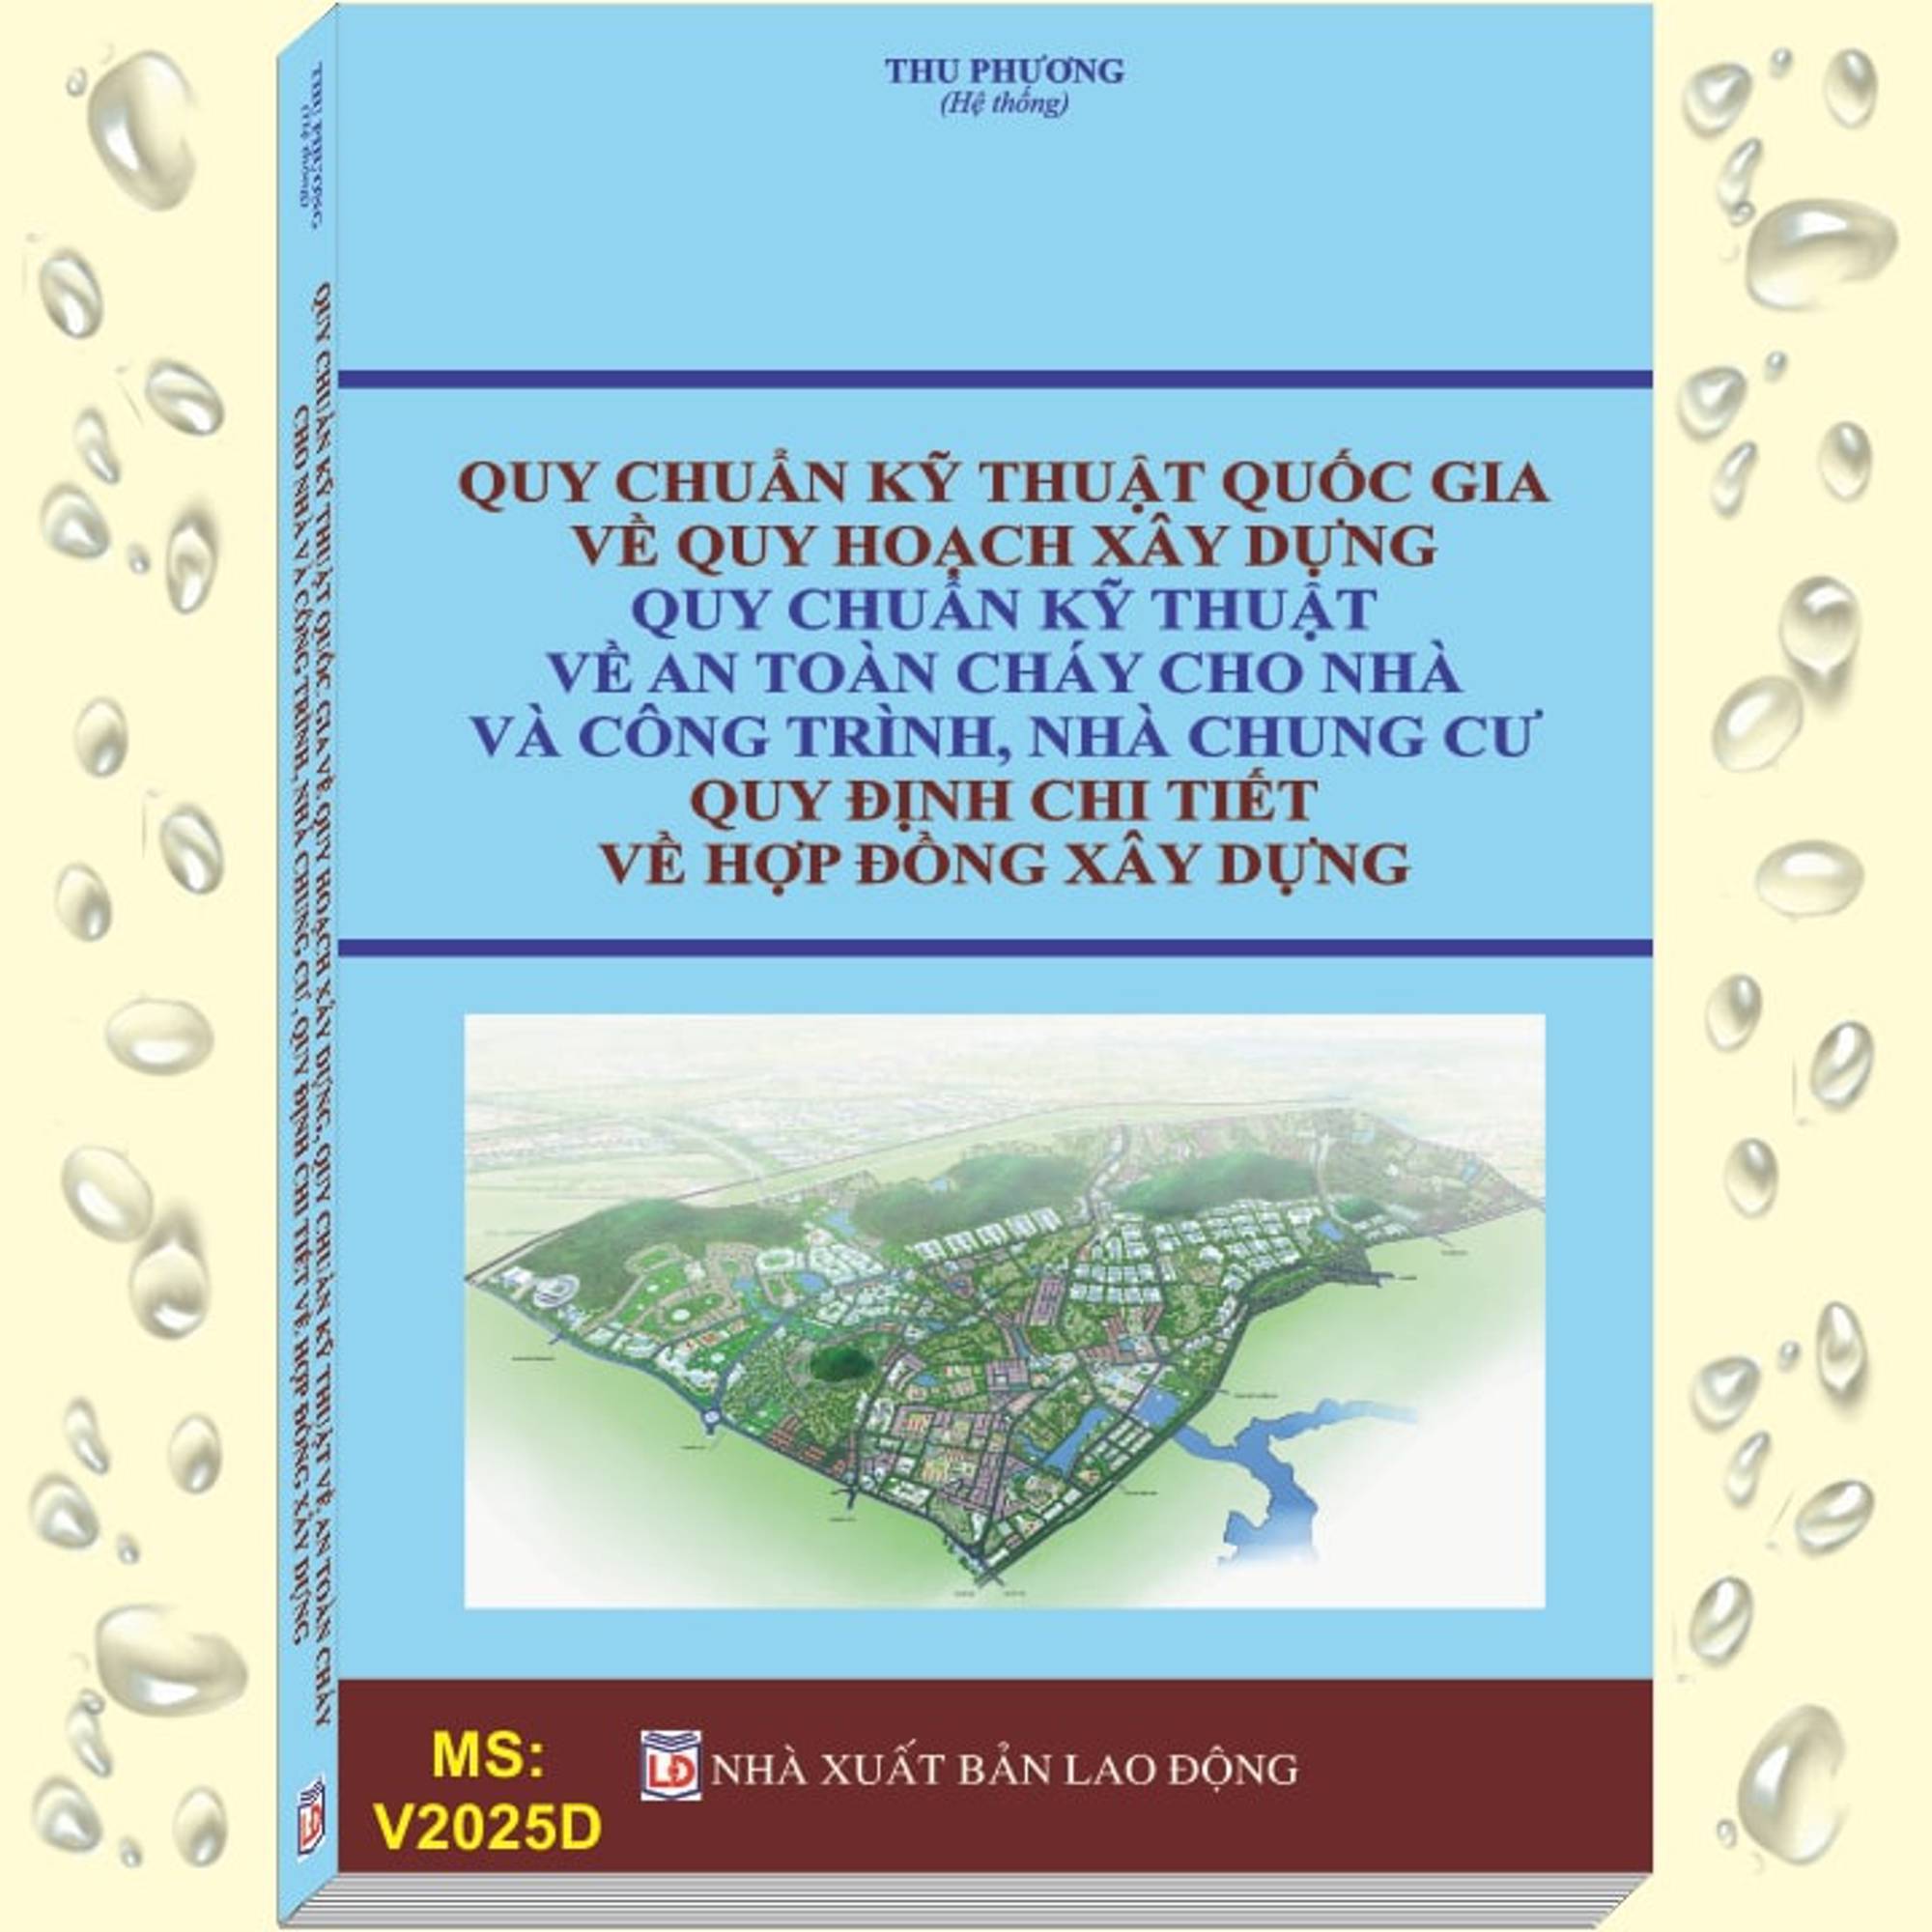 quy chuan ky thuat quoc gia ve quy hoach xay dung, an toan chay